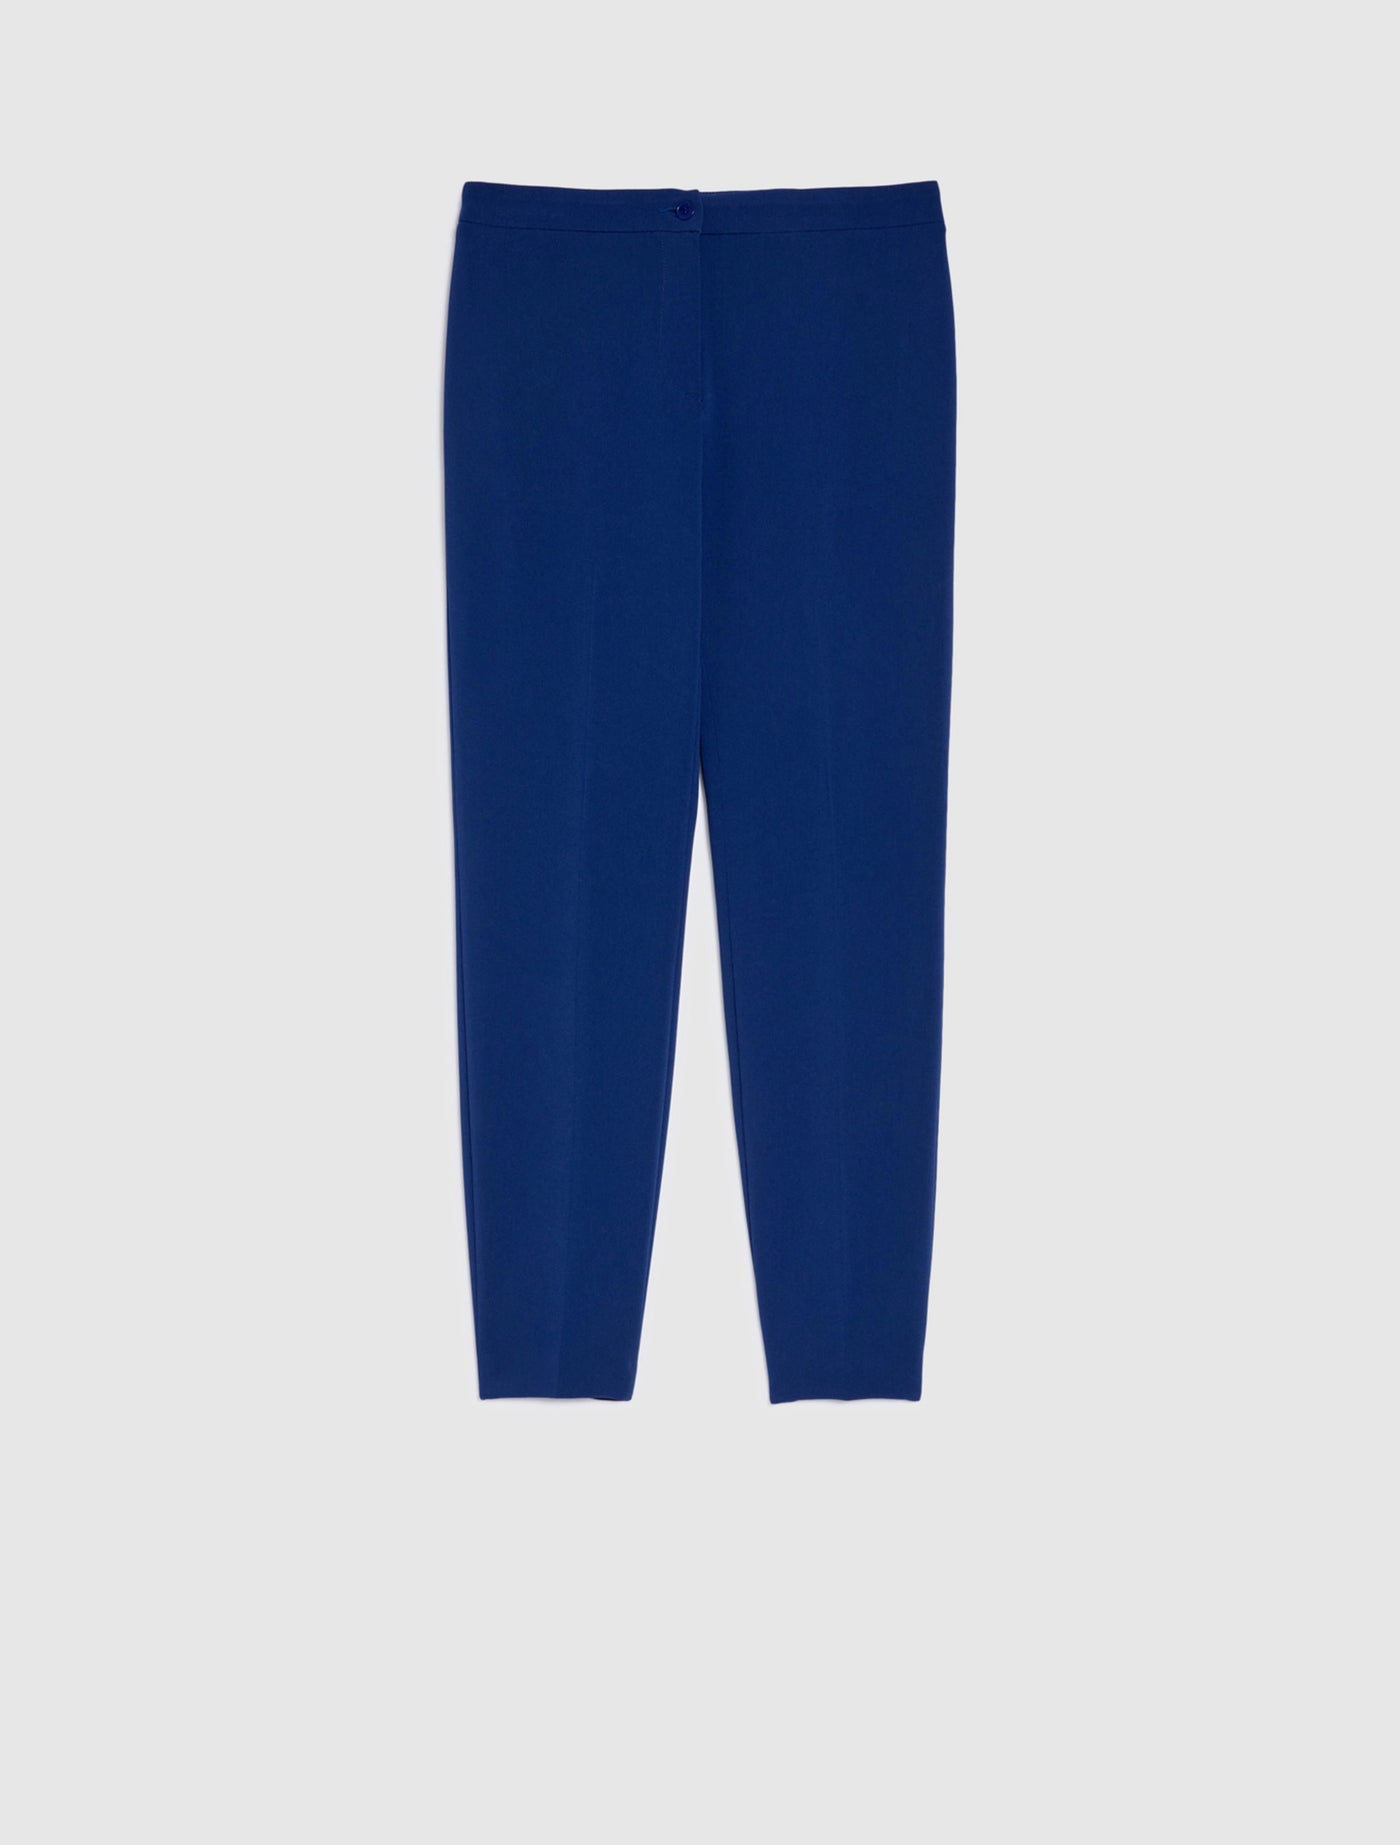 Penny Black Cigarette Trousers | Midnight Blue